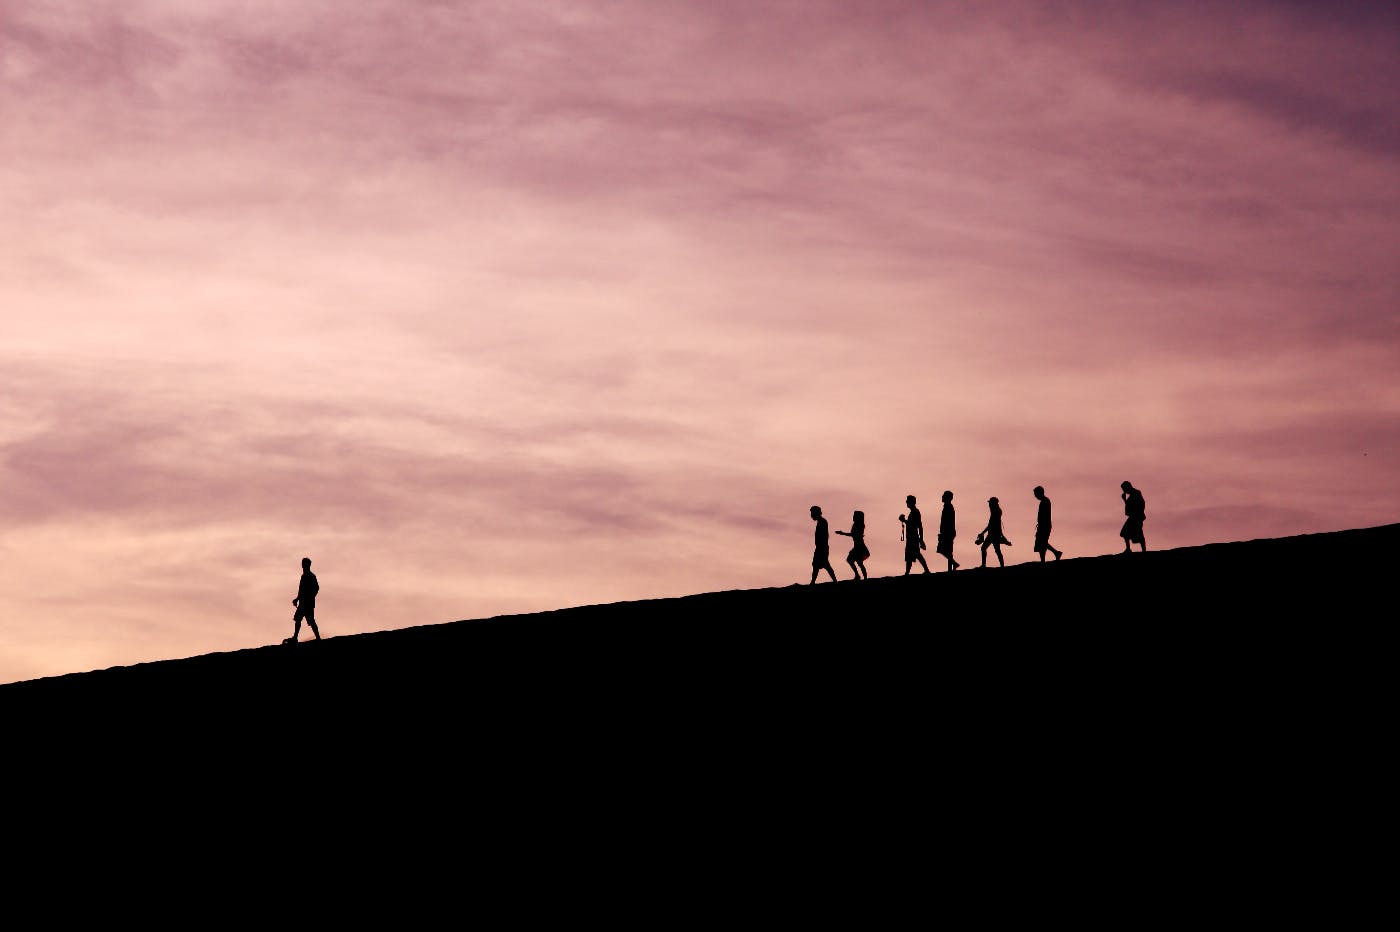 Silhouette of people walking down a hill with one person far in front of the otehrs leading